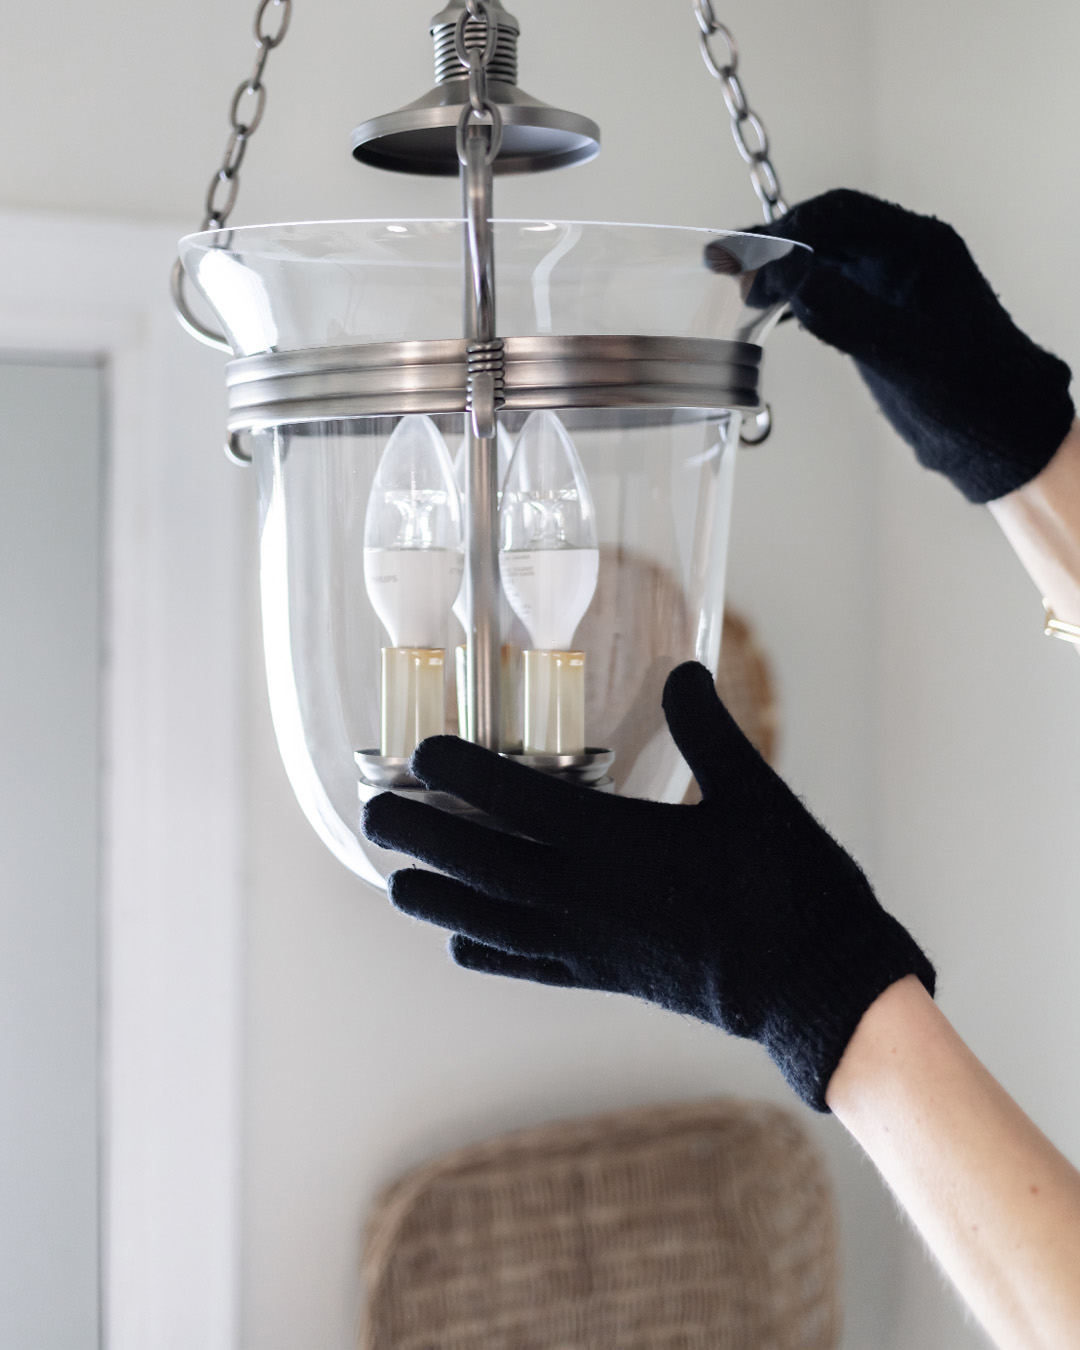 I have a few tricks for how to clean a glass light fixture that I absolutely swear by, and today I'm finally getting around to sharing them with you!